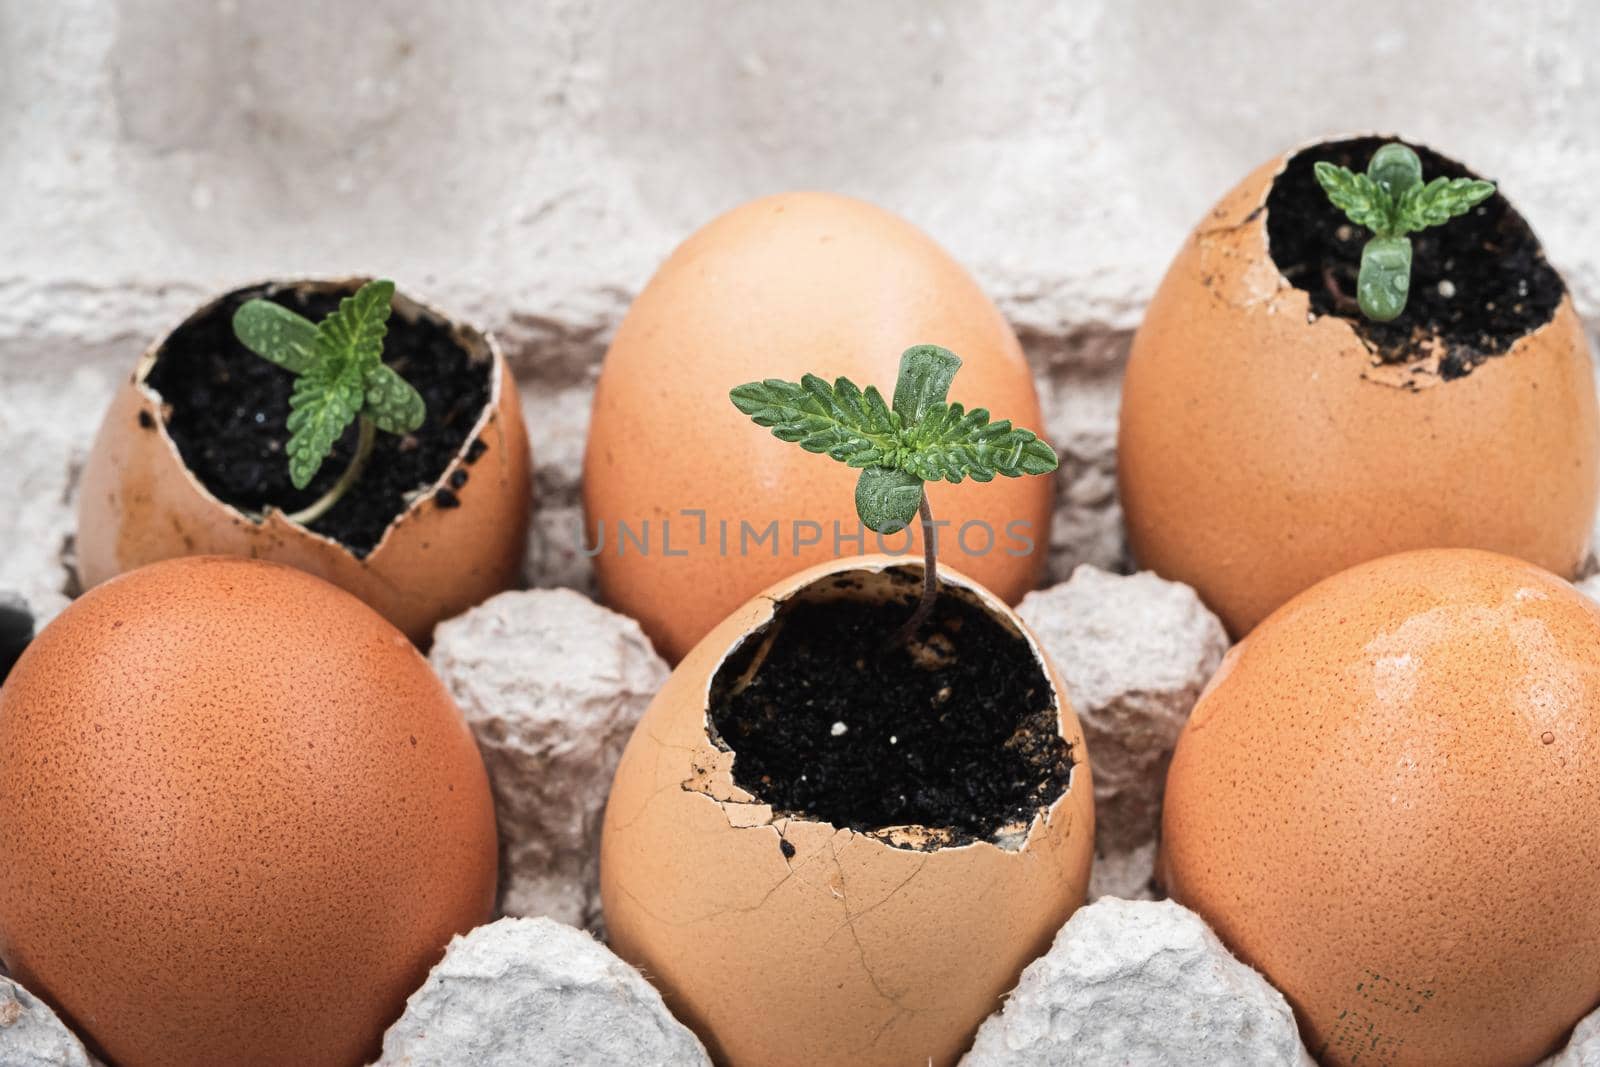 three sprouts of medical cannabis grows from an egg shell. against the background of three whole eggs. horizontal orientation.